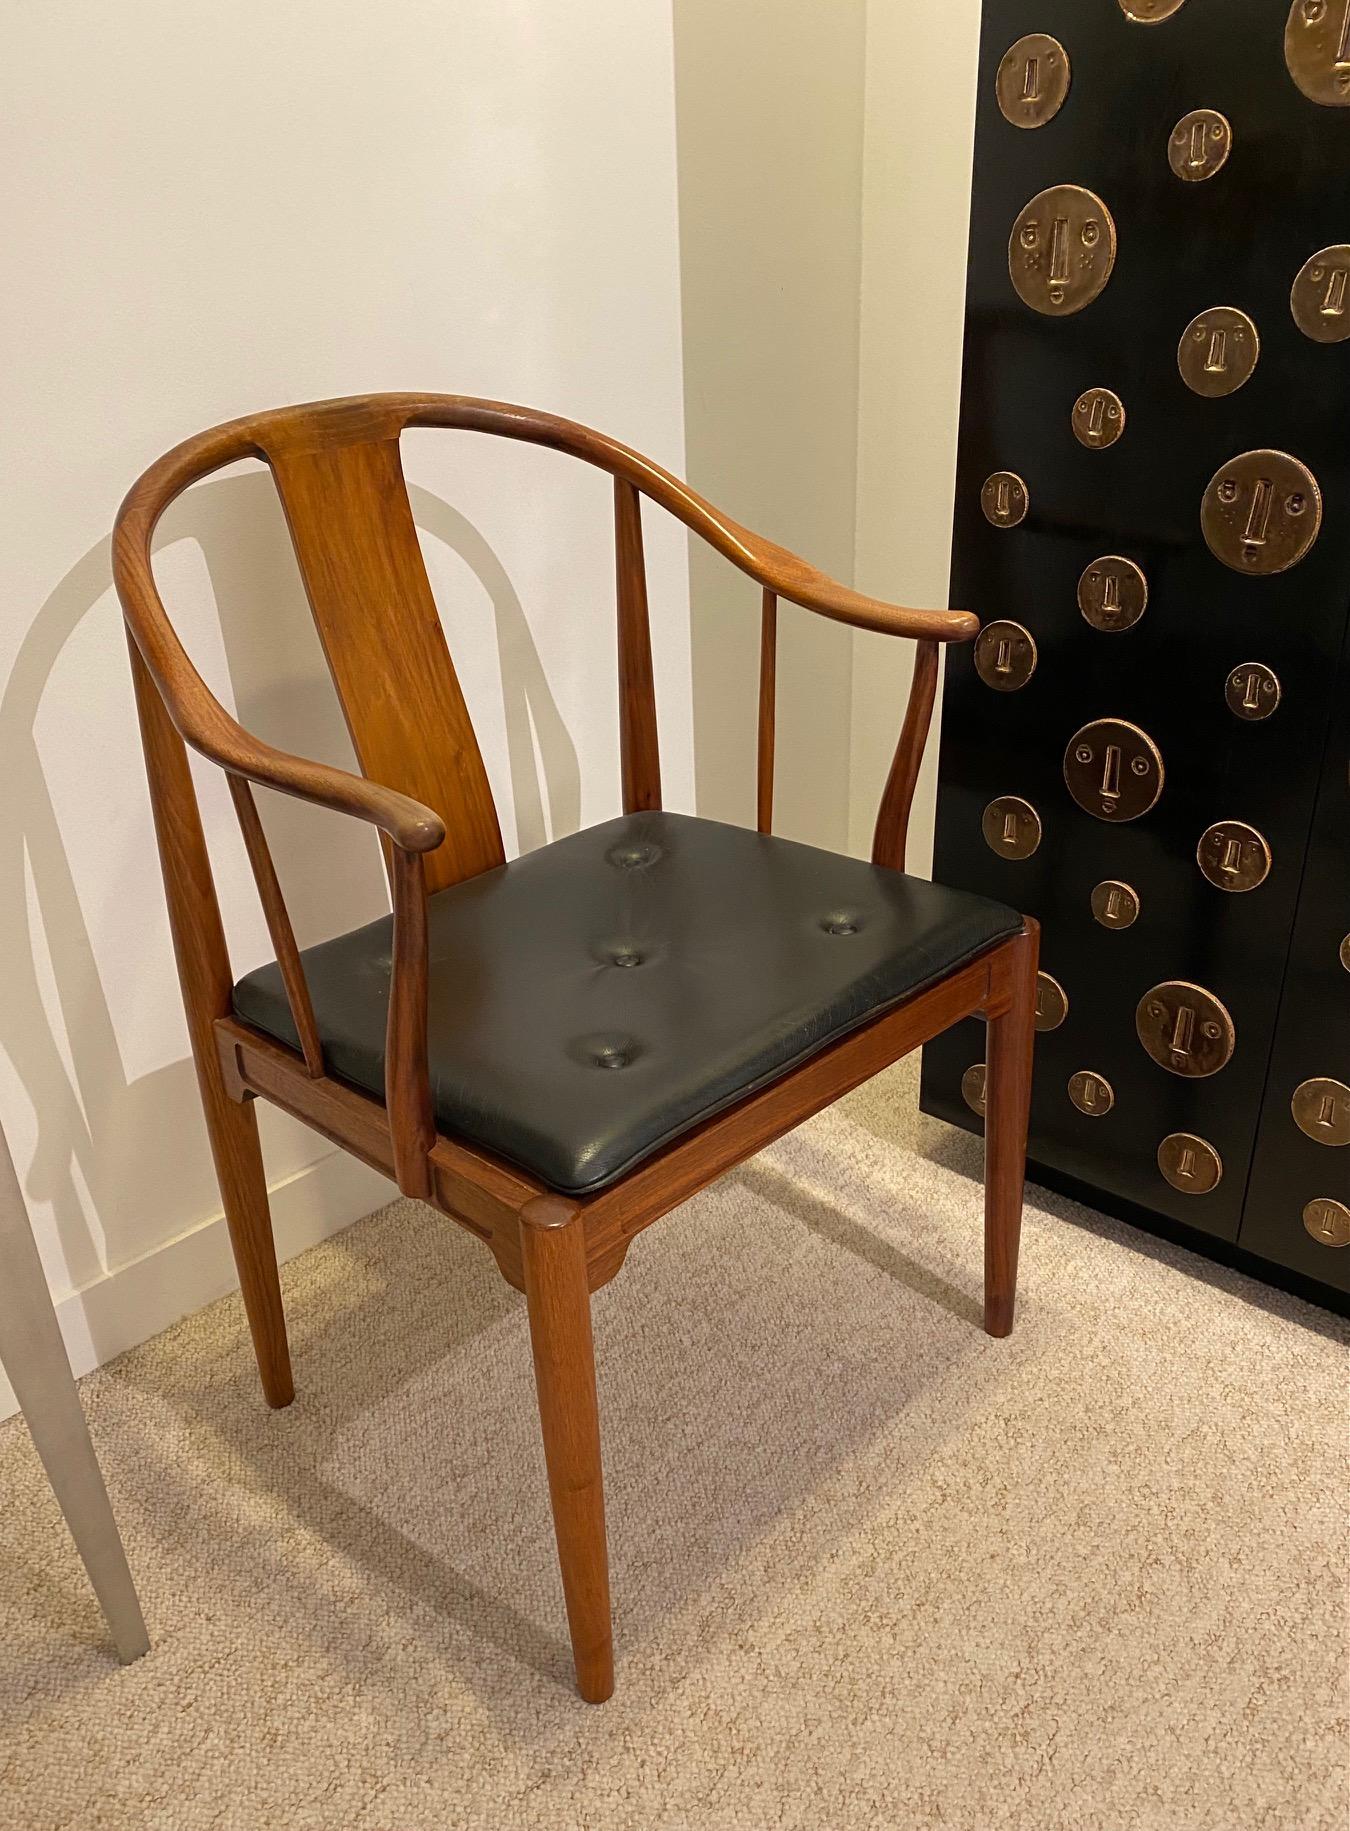 Hans J. Wegner, a 1977 Limited Edition Walnut Armchair “China Chair” For Sale 4